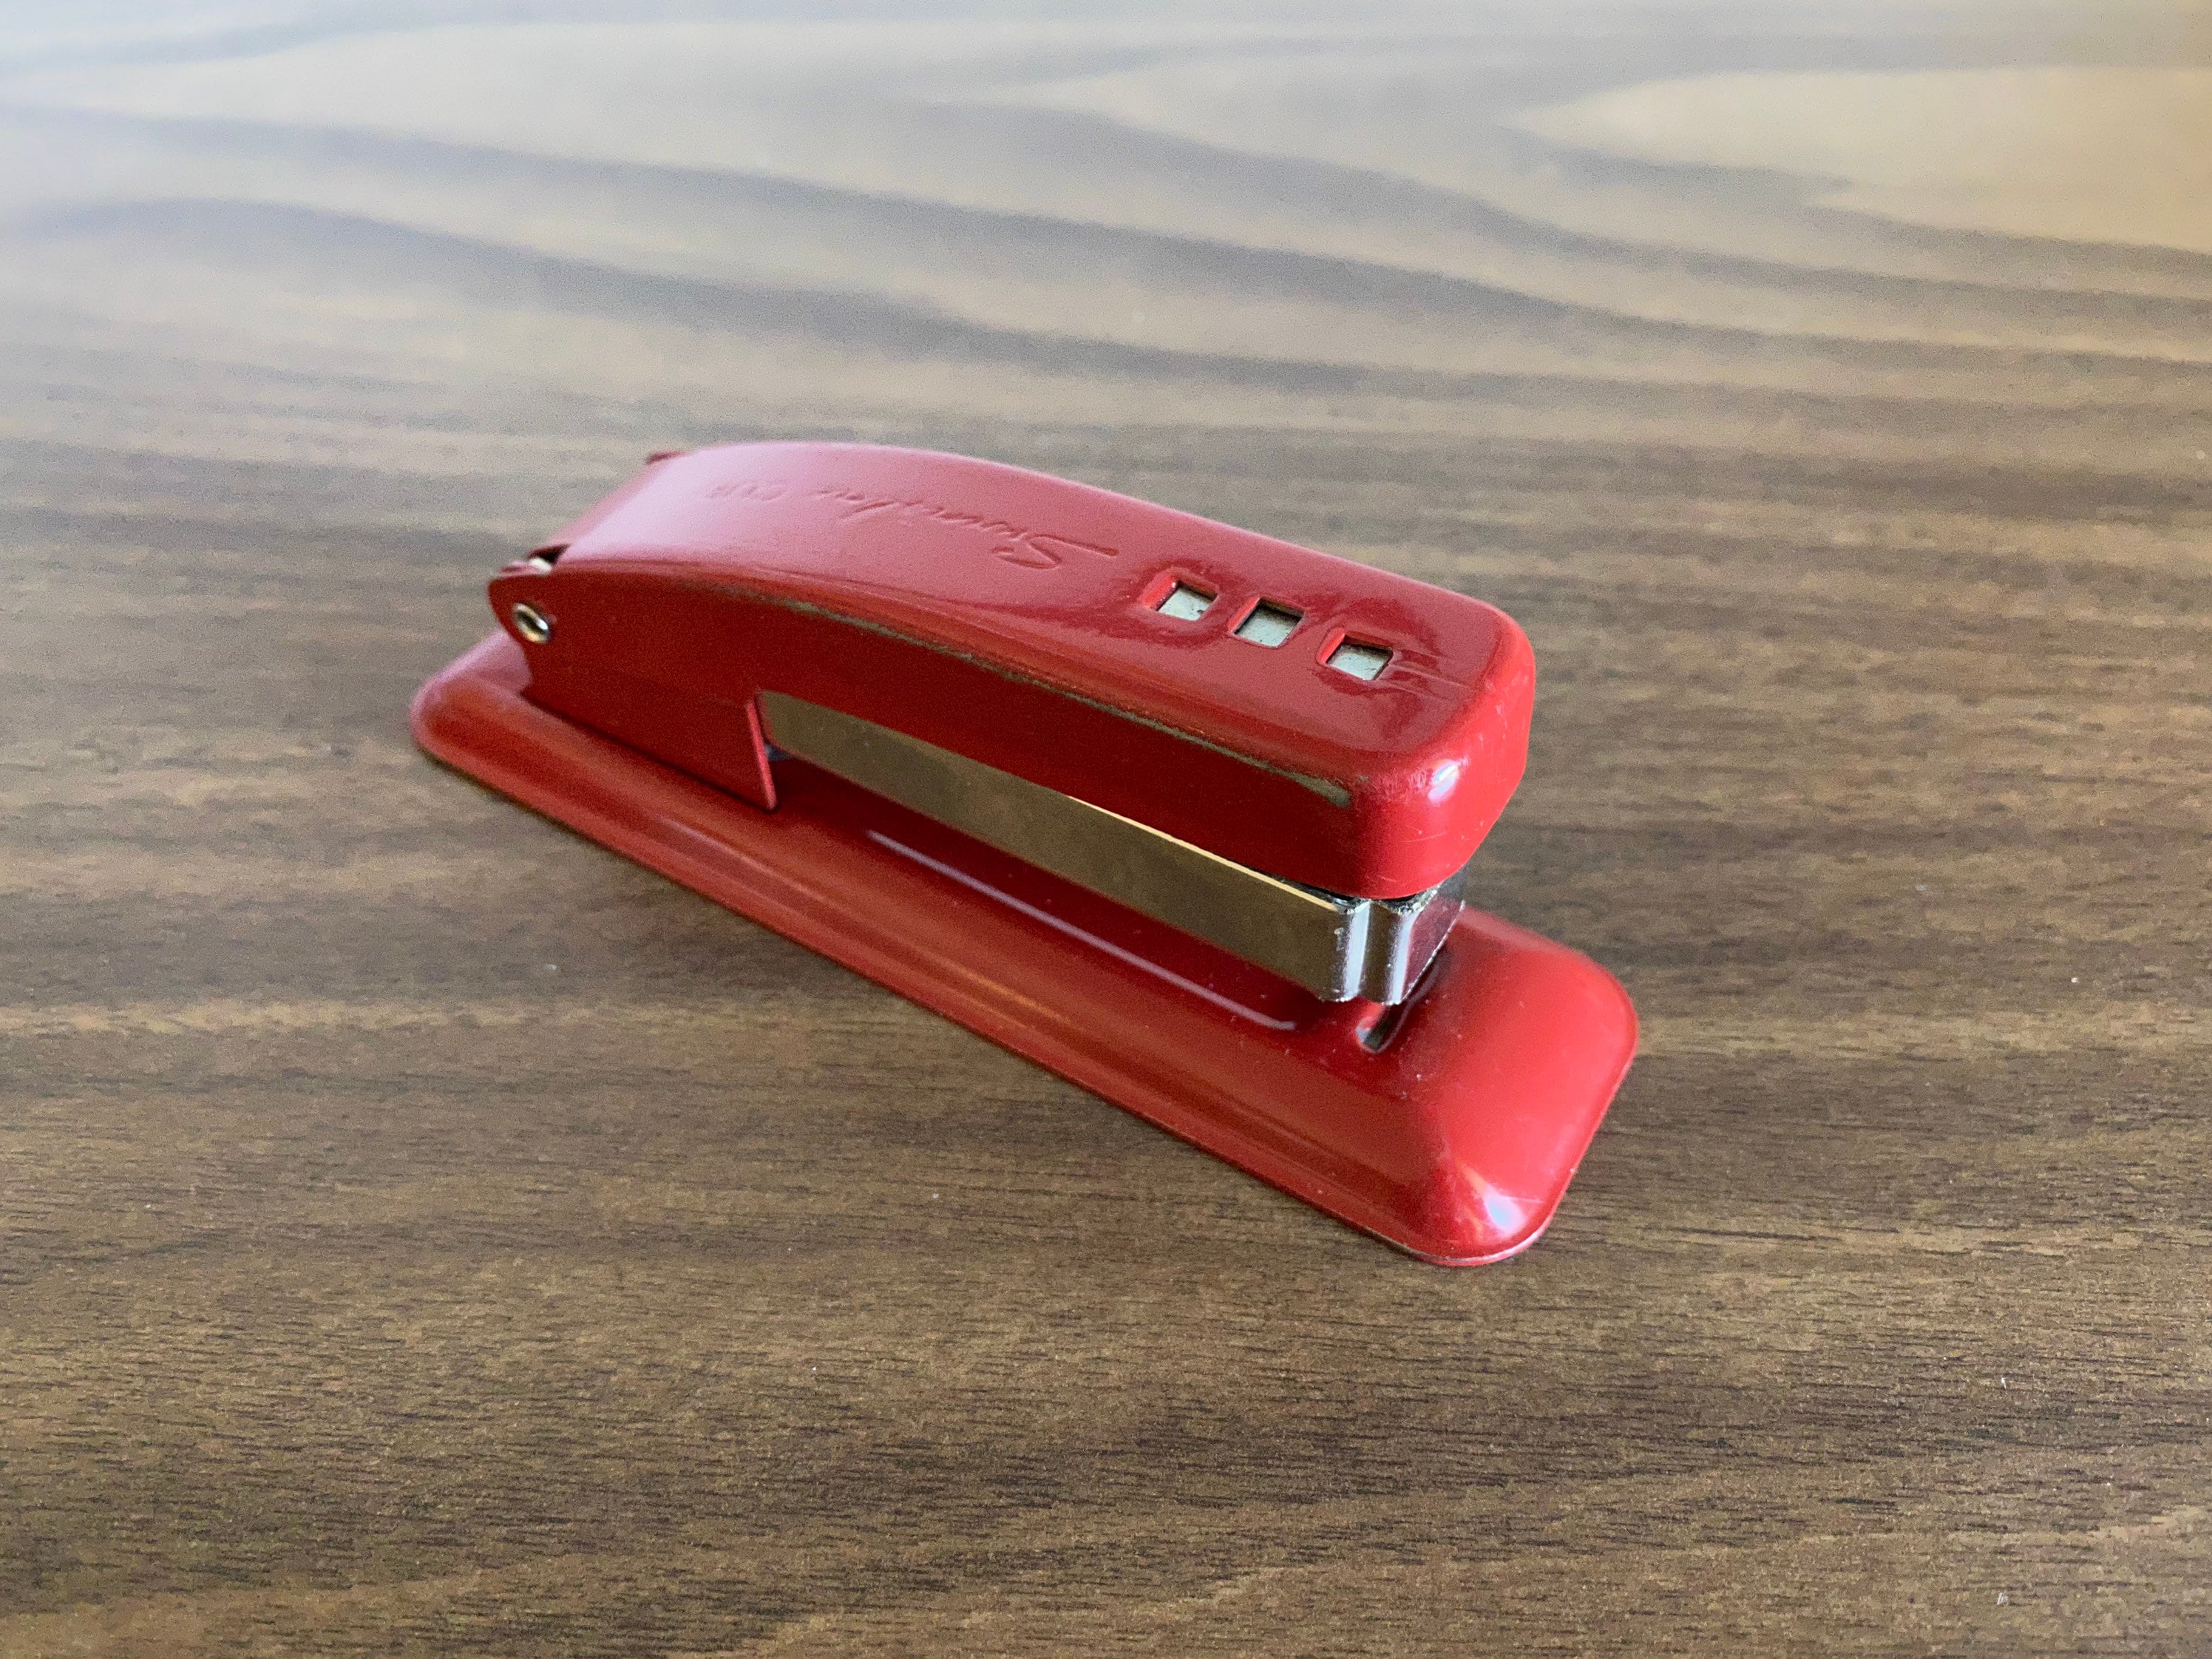 Red Cub Desk Stapler by Swingline, Steel Stapler Made in Long Island City,  NY USA Unused in Original Packaging With Partial Box of Staples 